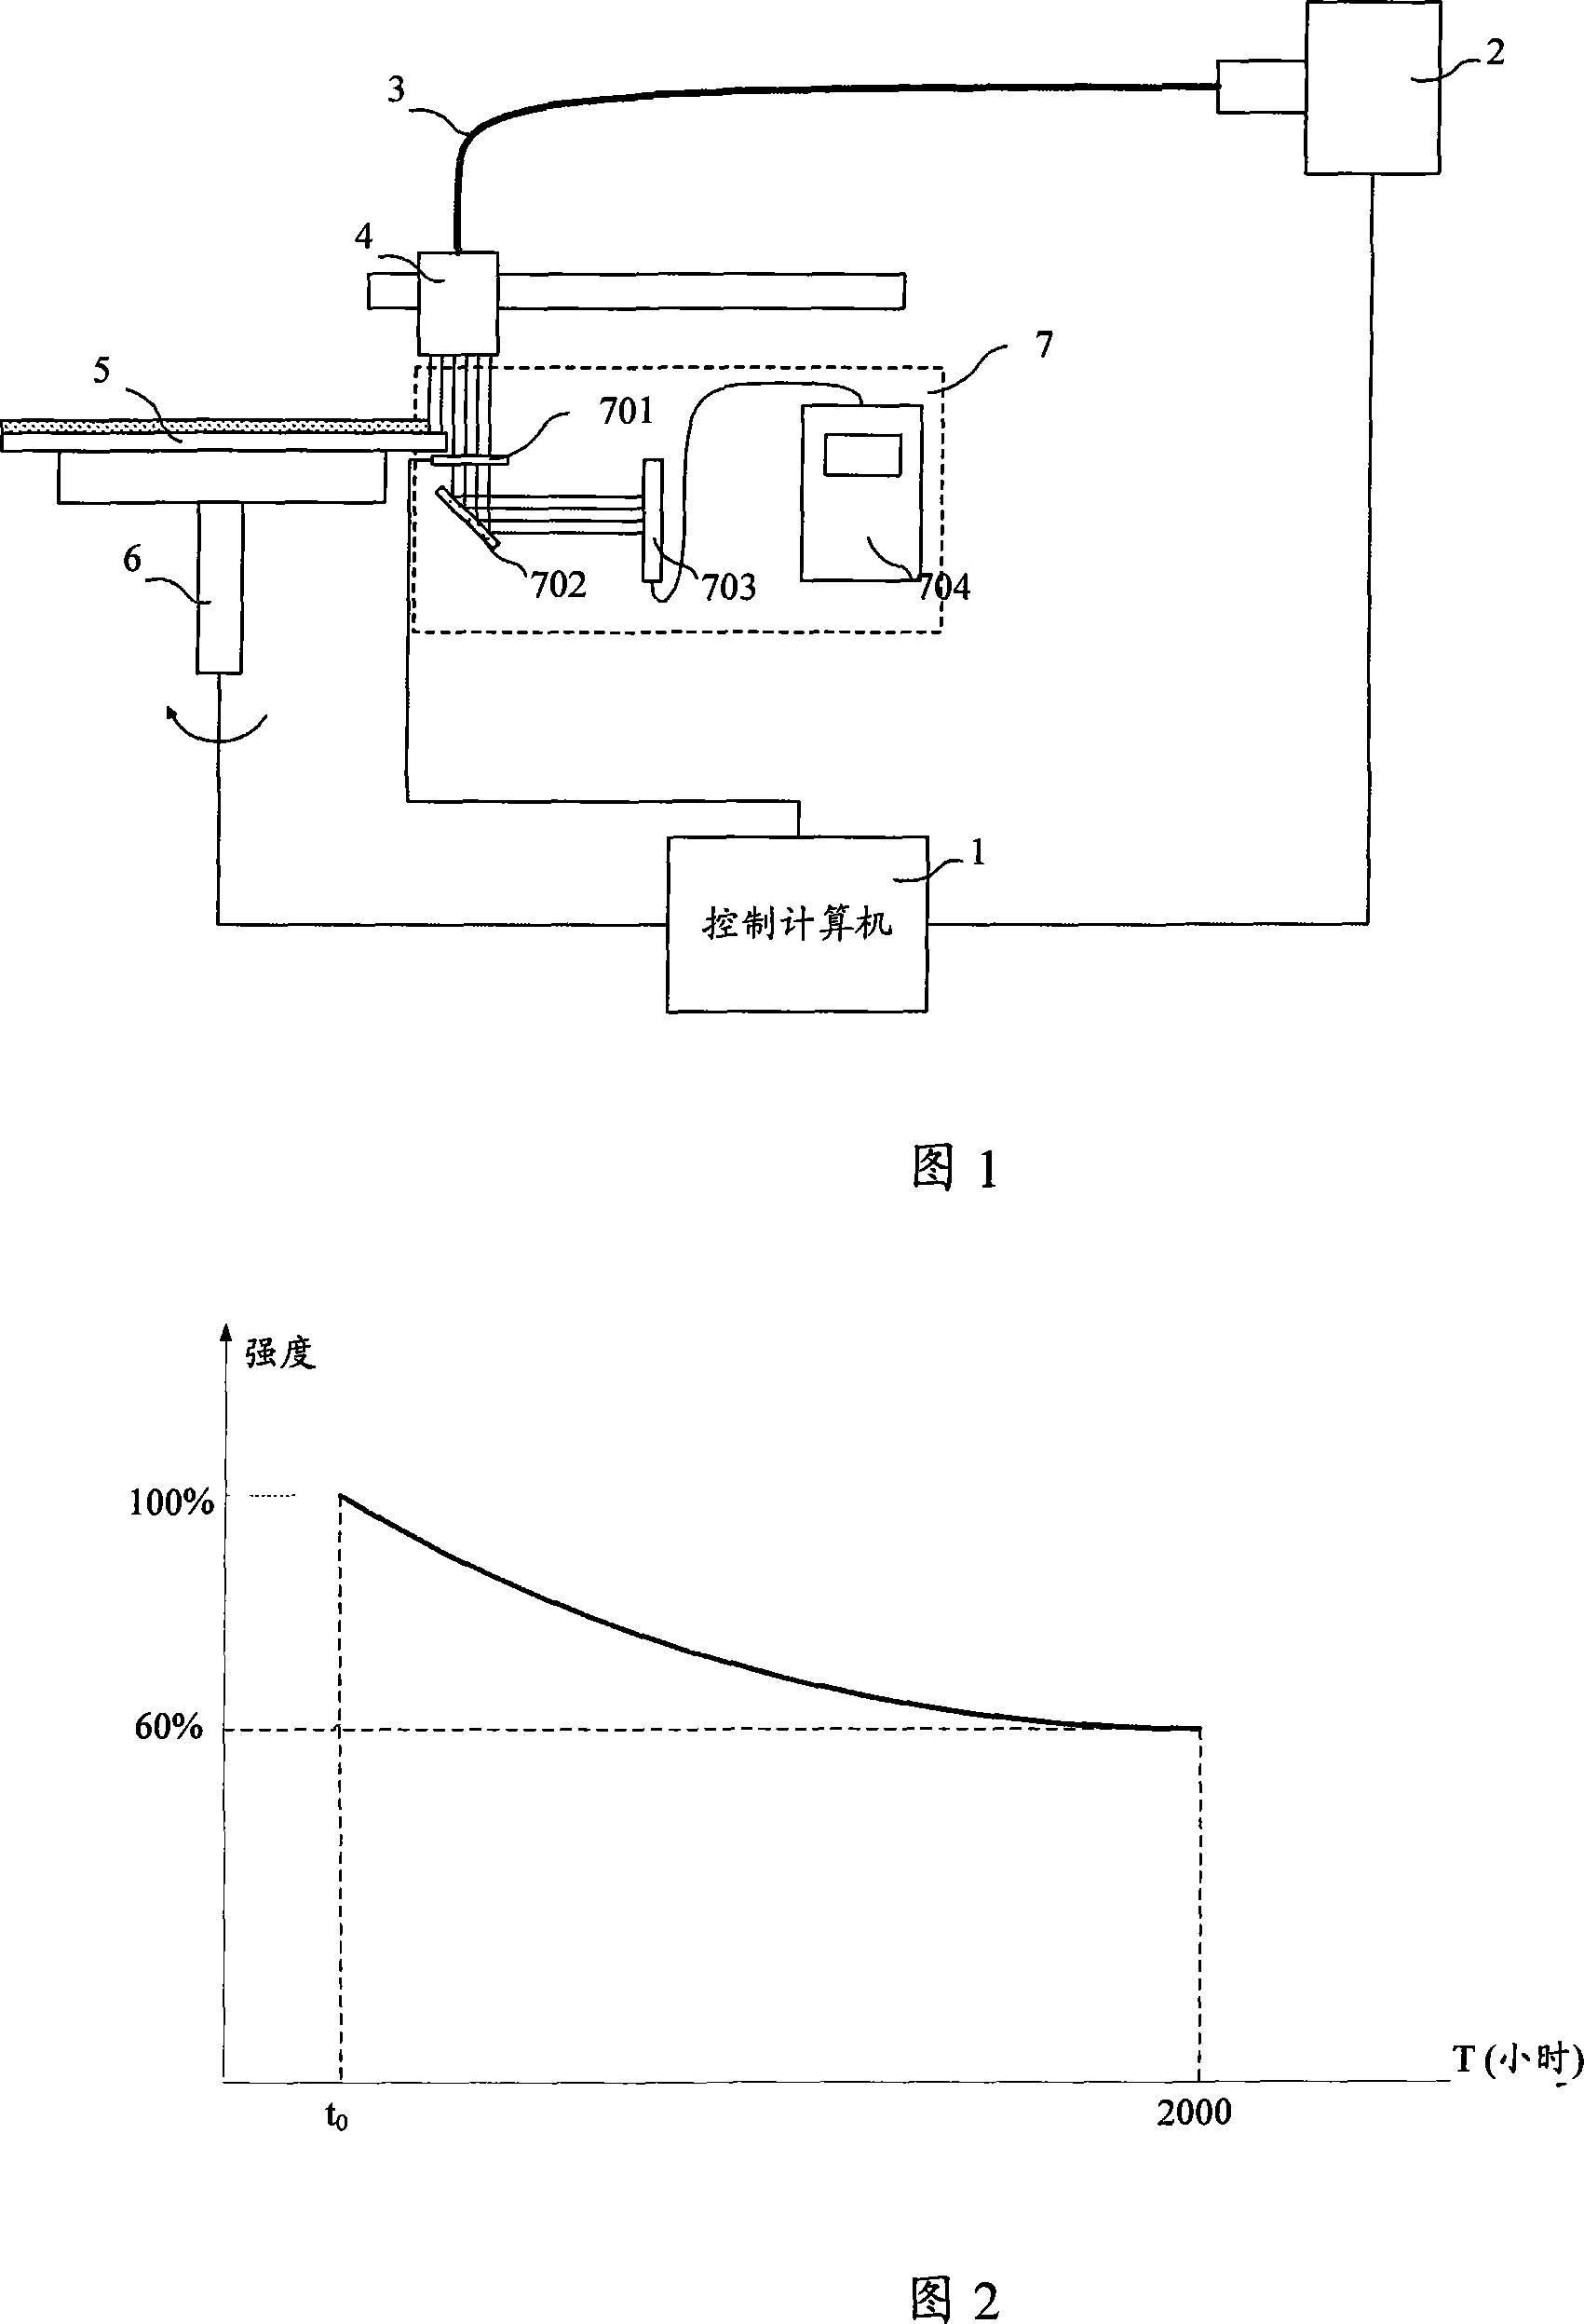 Silicon slice edge exposure system and its light intensity control method